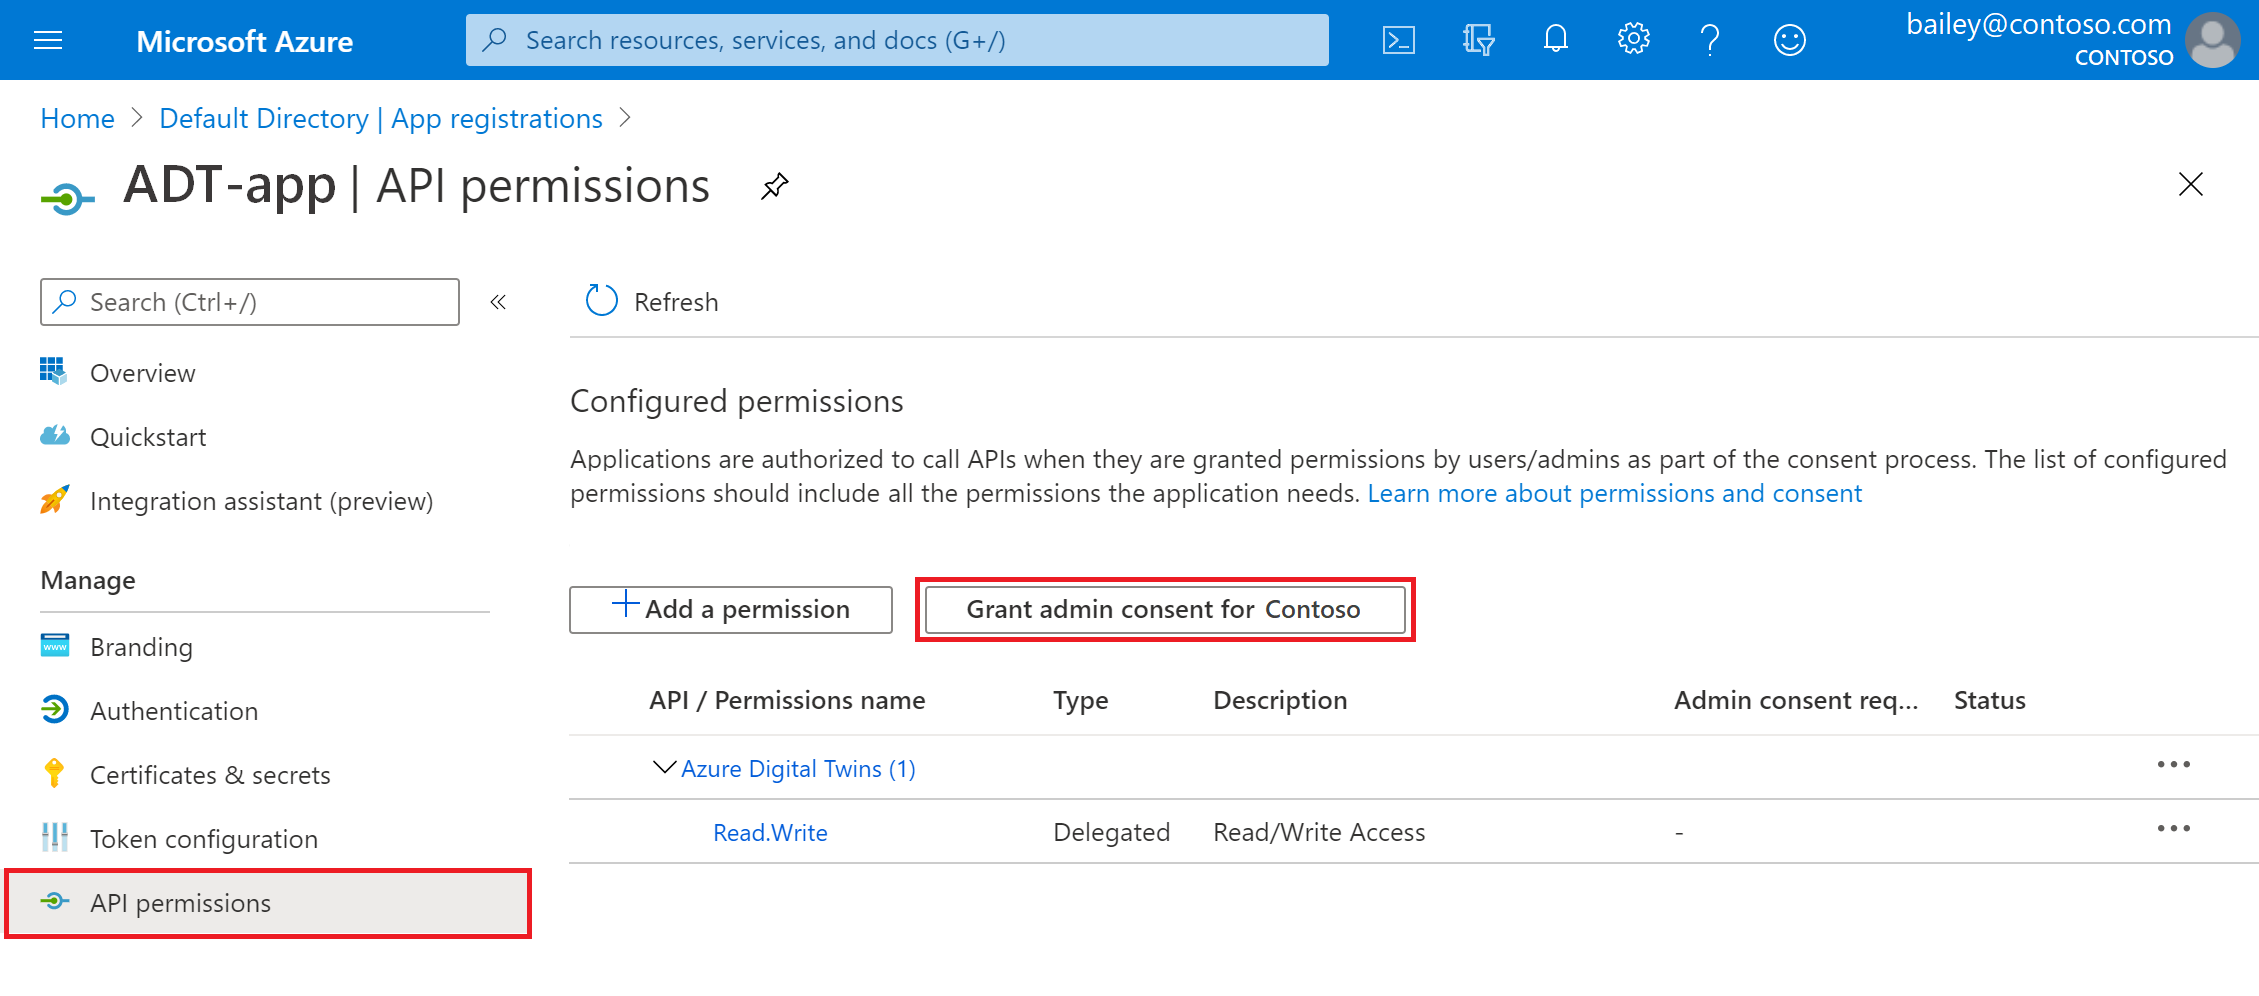 Screenshot of the Azure portal showing the 'Grant admin consent' button under API permissions.